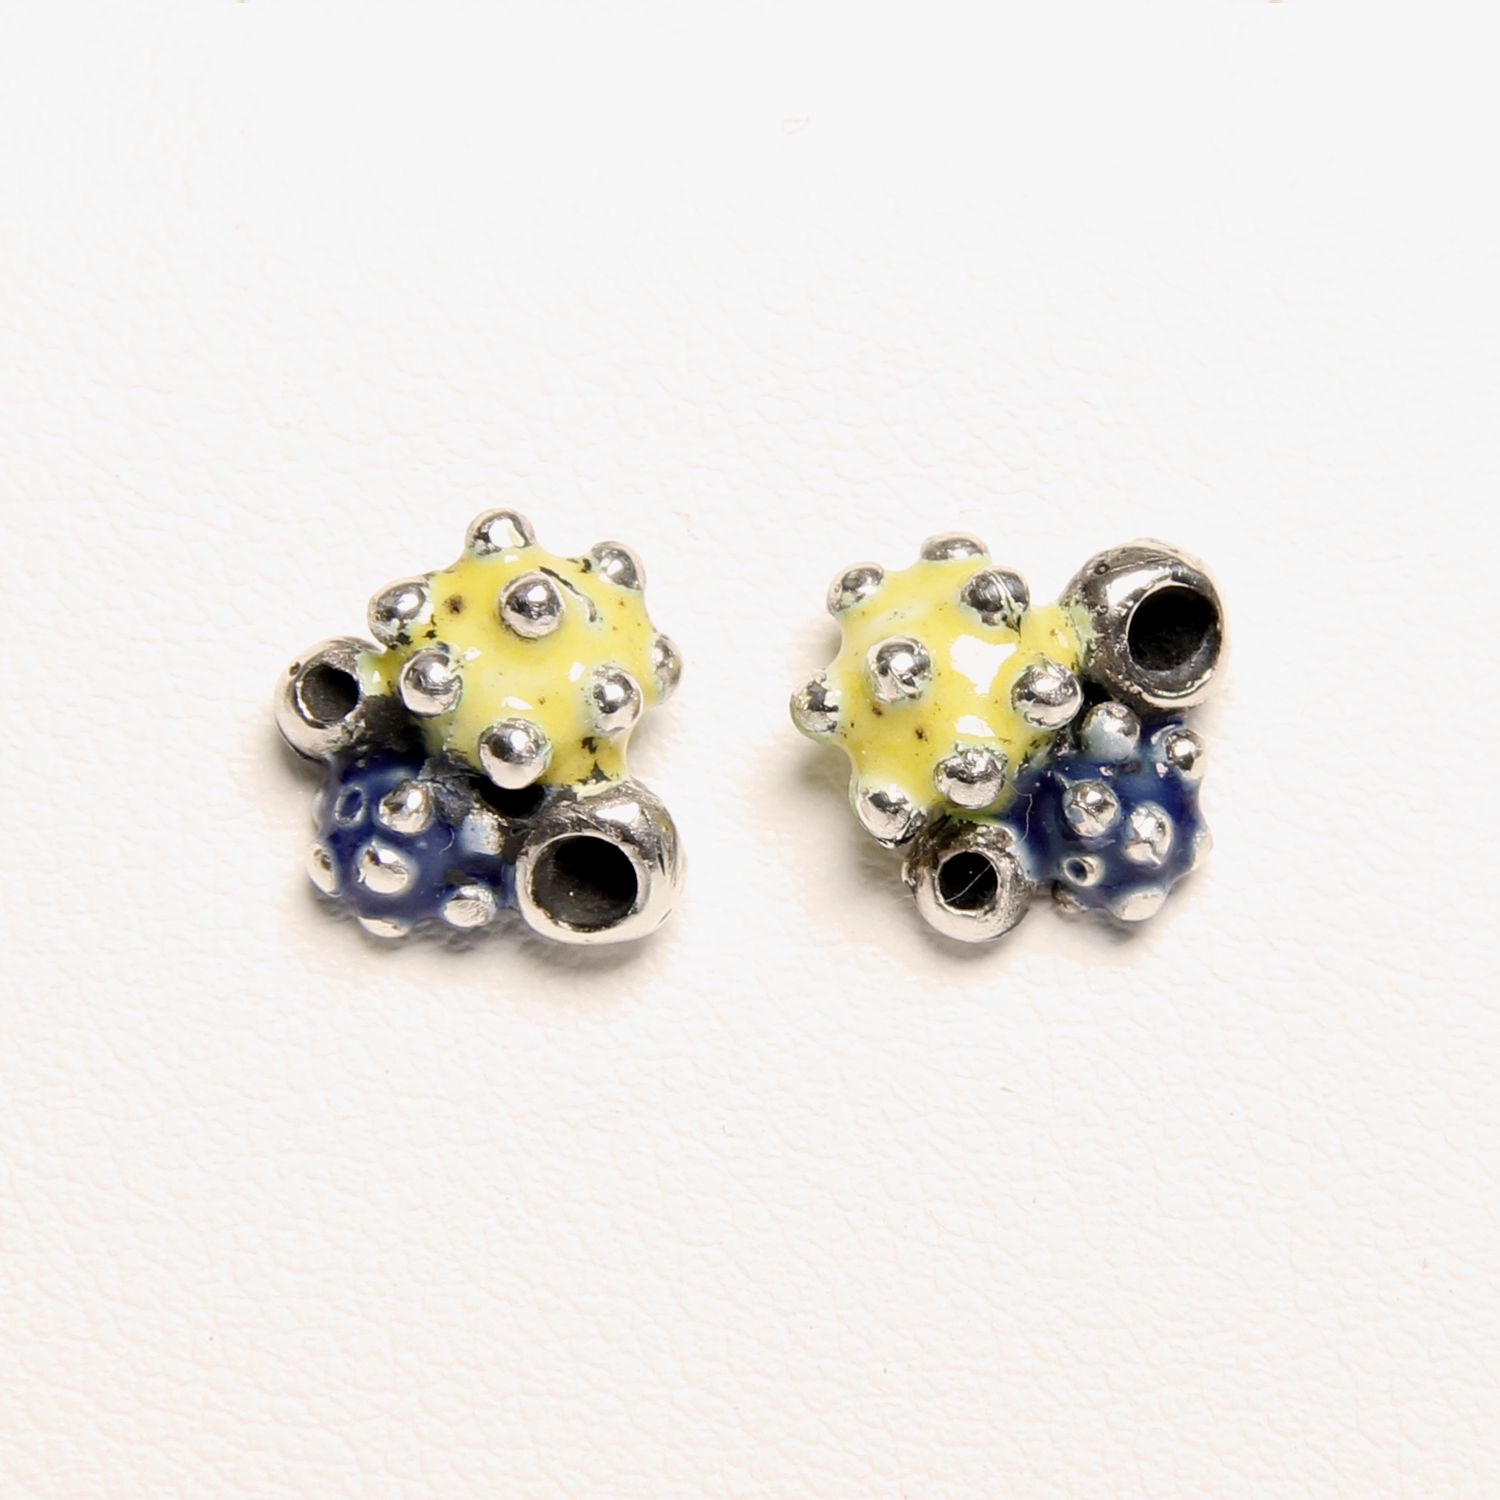 Cinelli Maillet: Pear Earrings Product Image 1 of 2